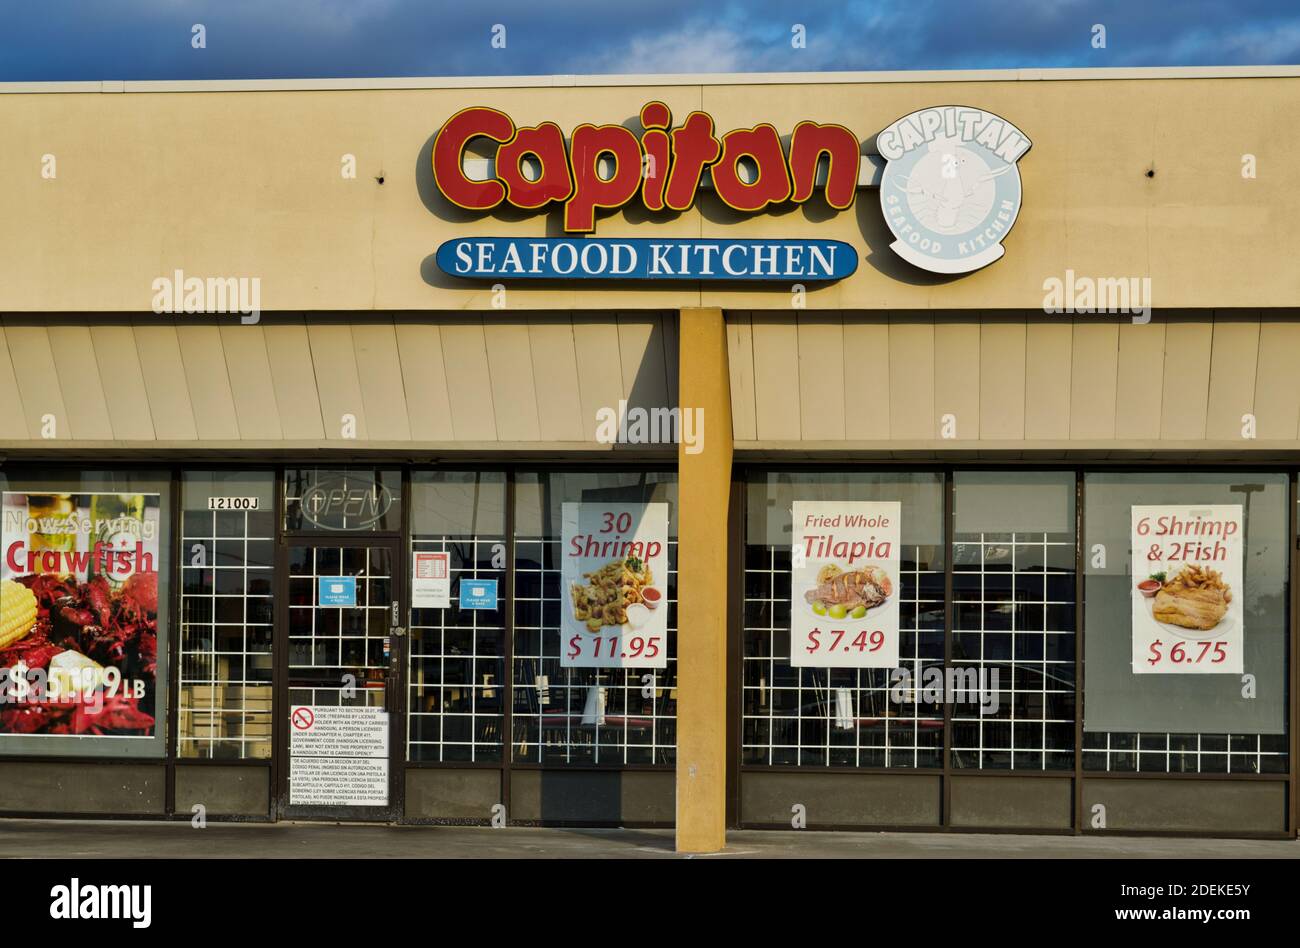 Houston, Texas USA 11-26-2020: Capitan Seafood Kitchen in Houston, TX. Cajun and Creole style restaurant typical of the local area. Stock Photo